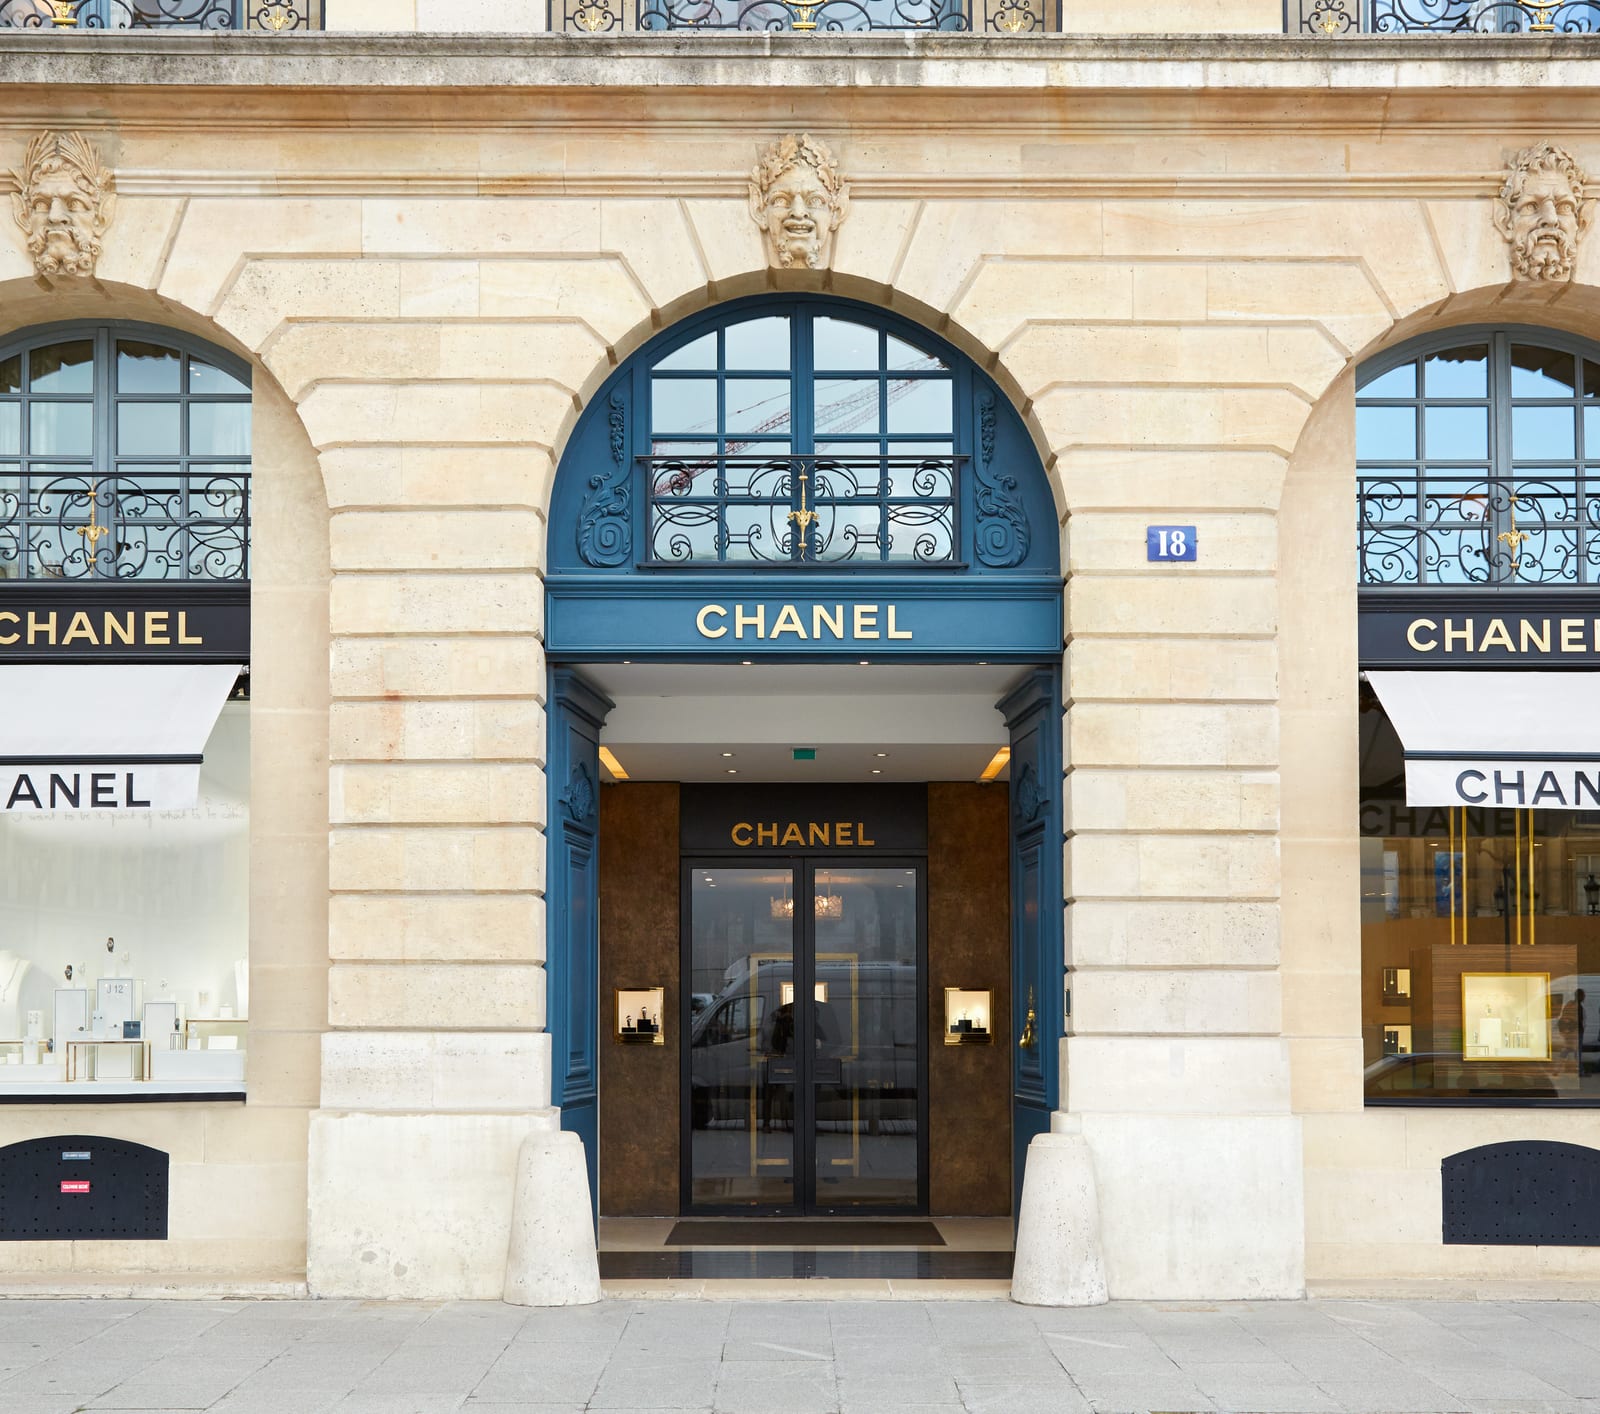 Where is the Cheapest Place to Buy Chanel?